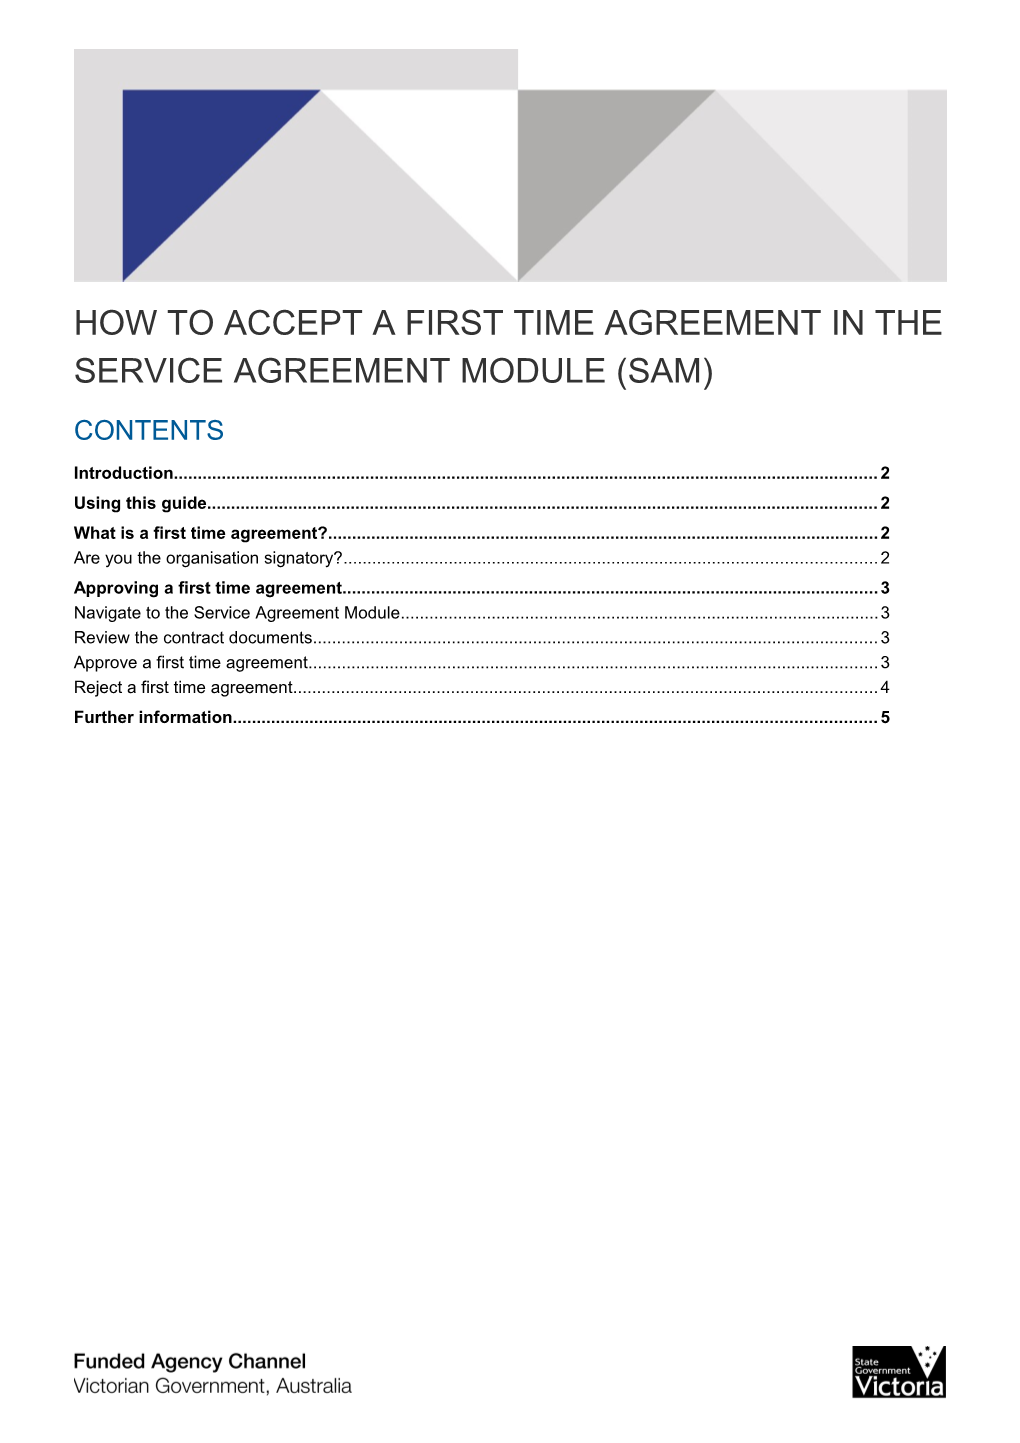 How to Accept a First Time Agreement in the Service Agreement Module (SAM)